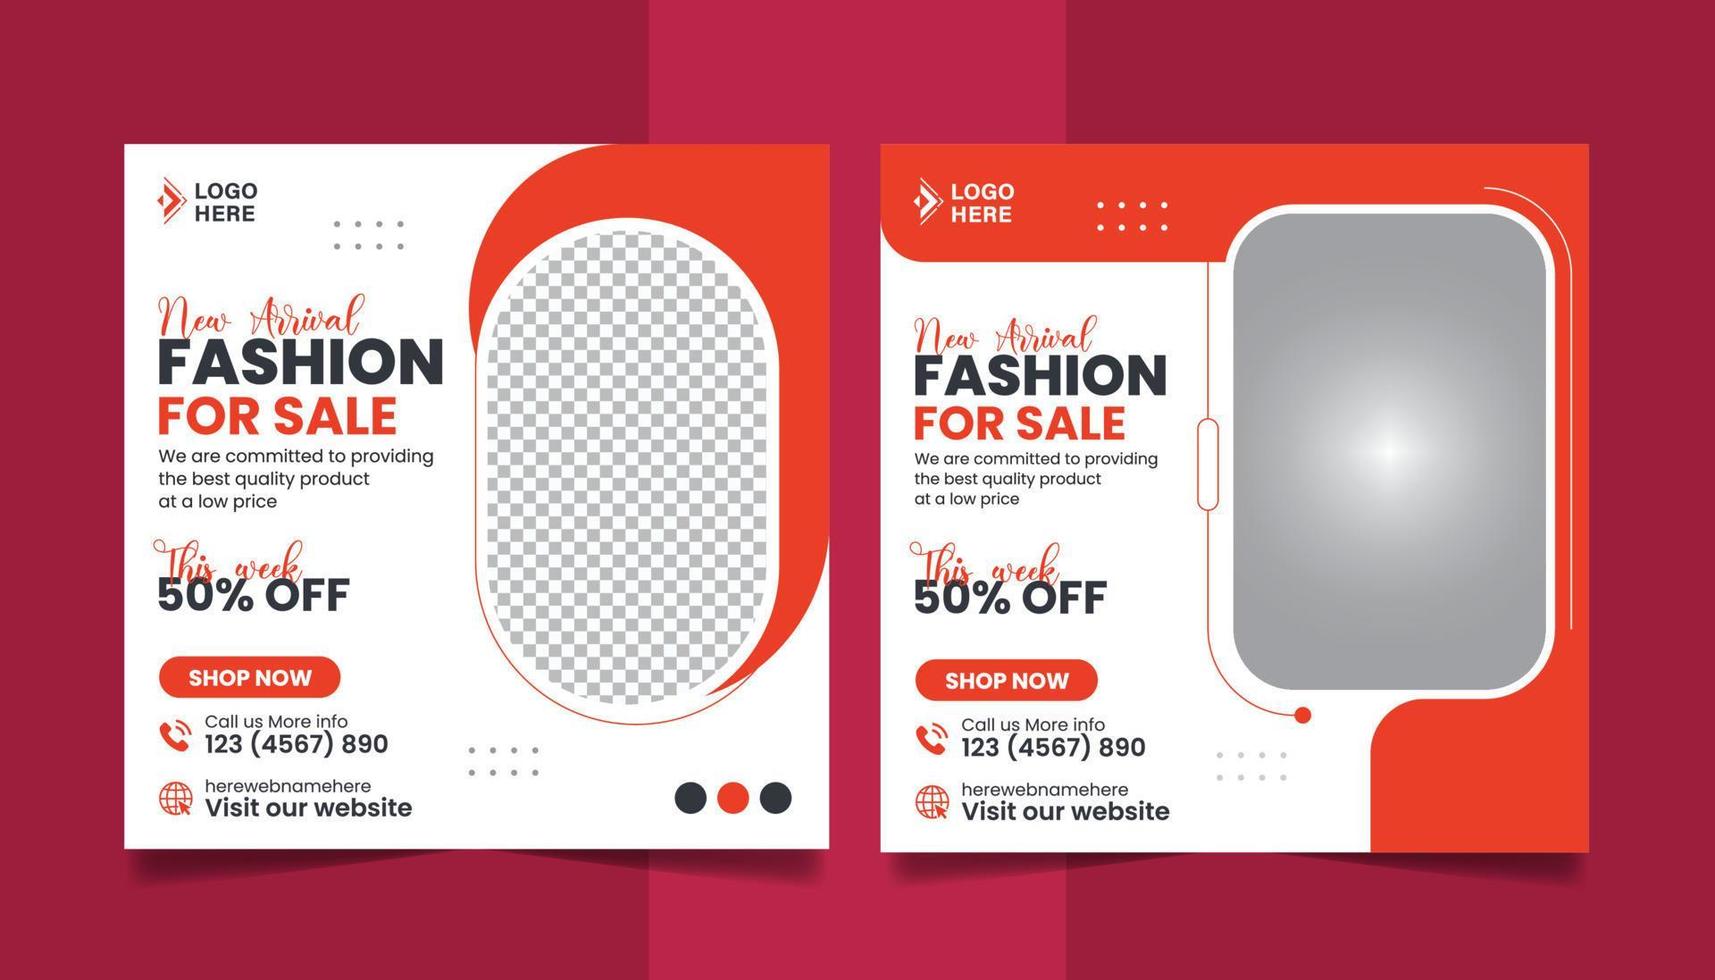 Fashion sale social media post design color trends collection promotion square web banner template. vector